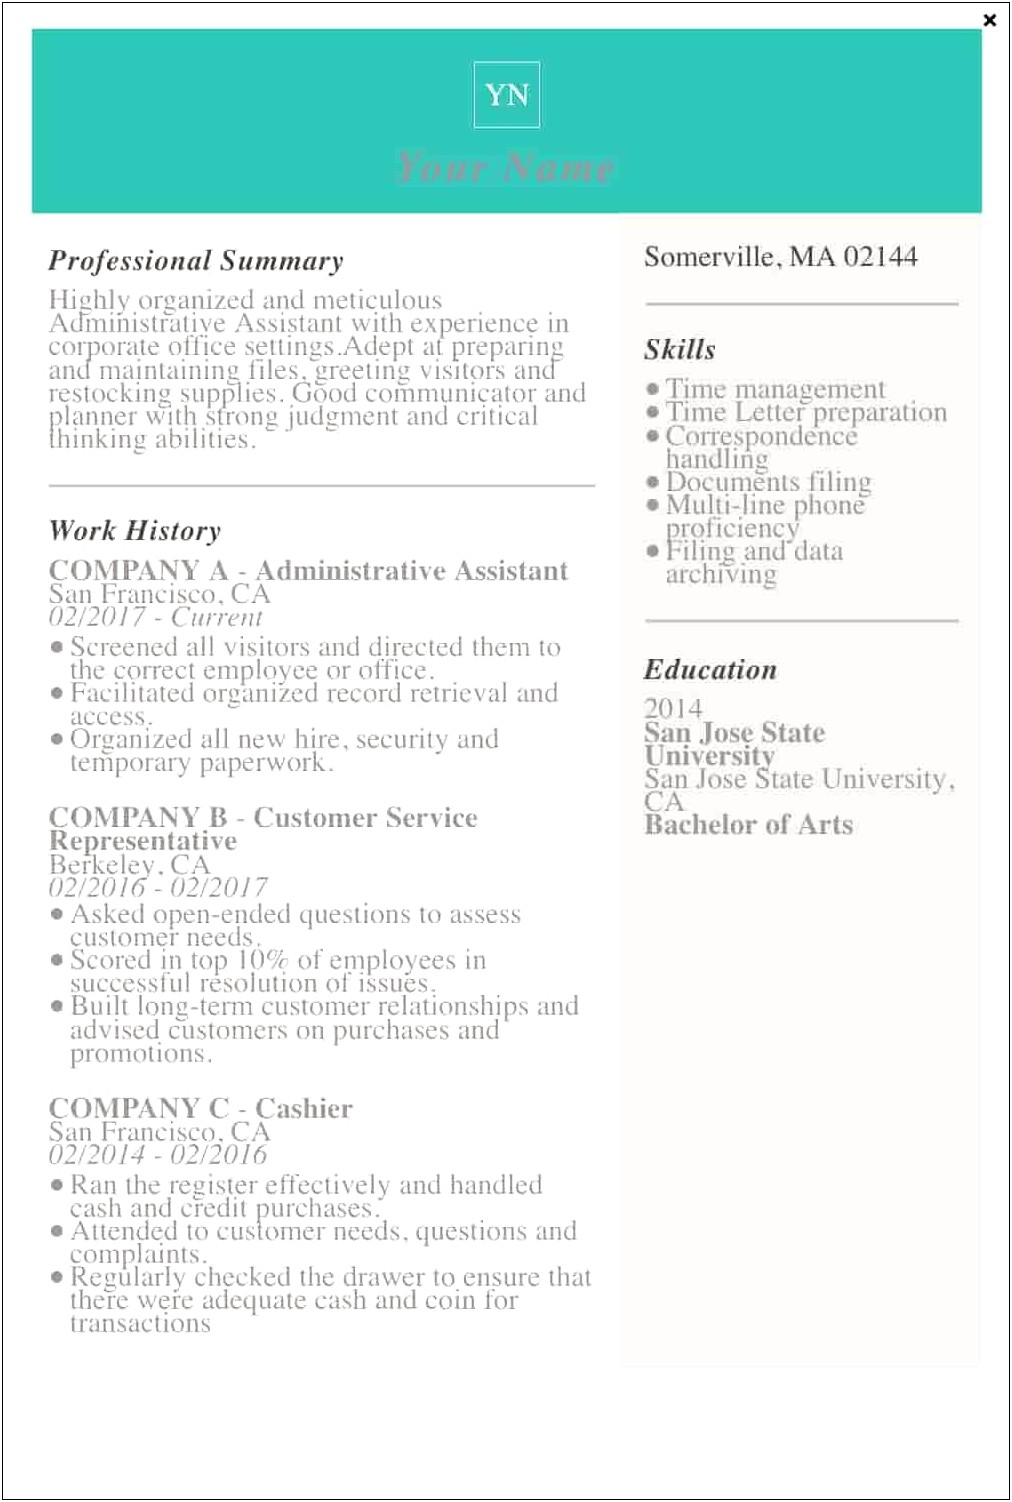 Top 10 Resume Job Pages